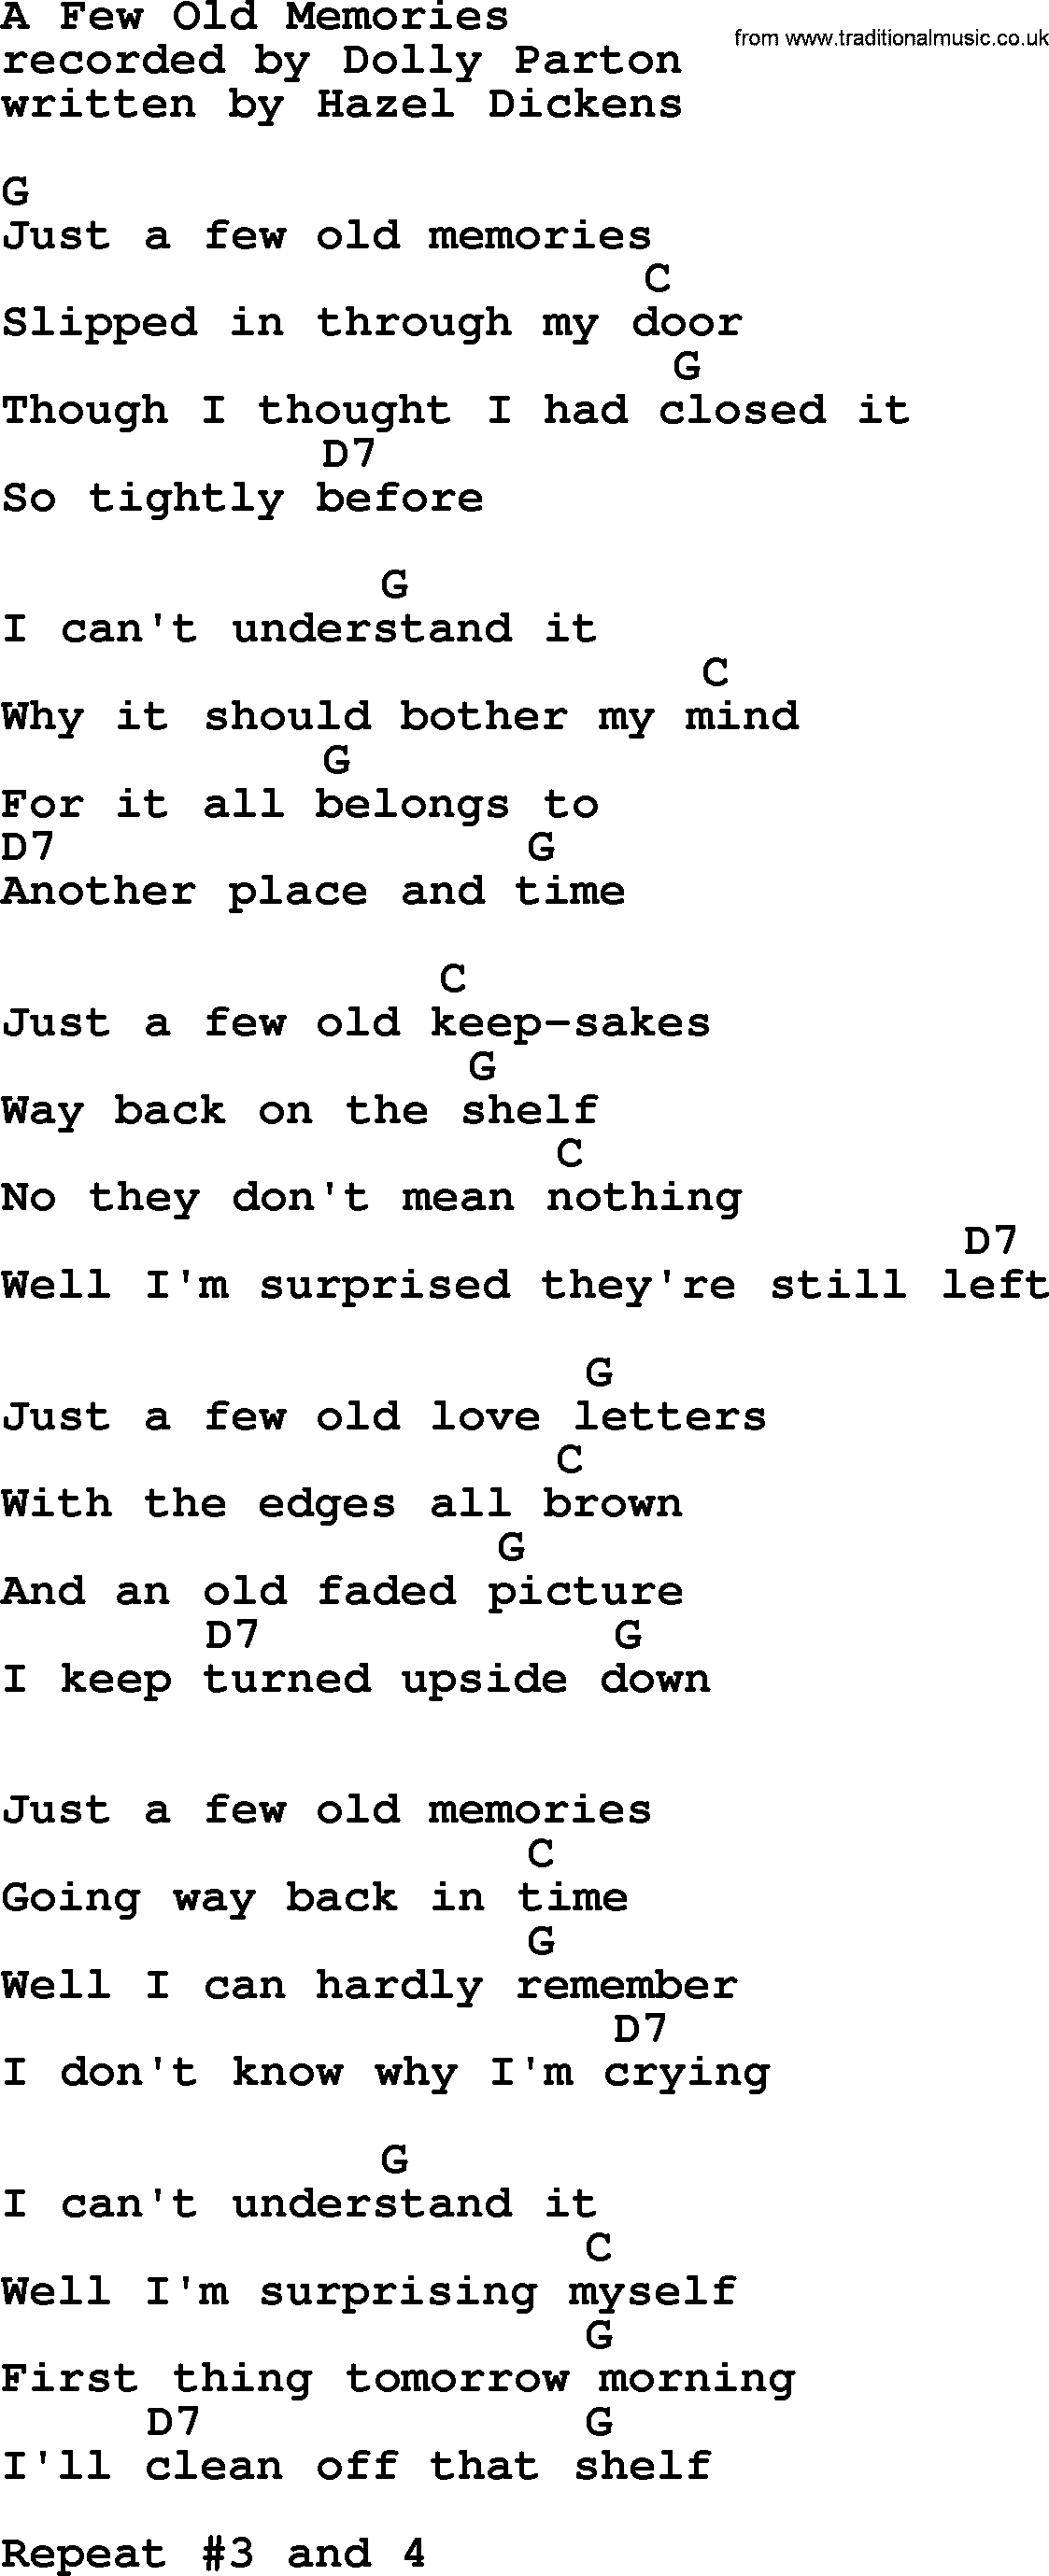 Dolly Parton song A Few Old Memories, lyrics and chords